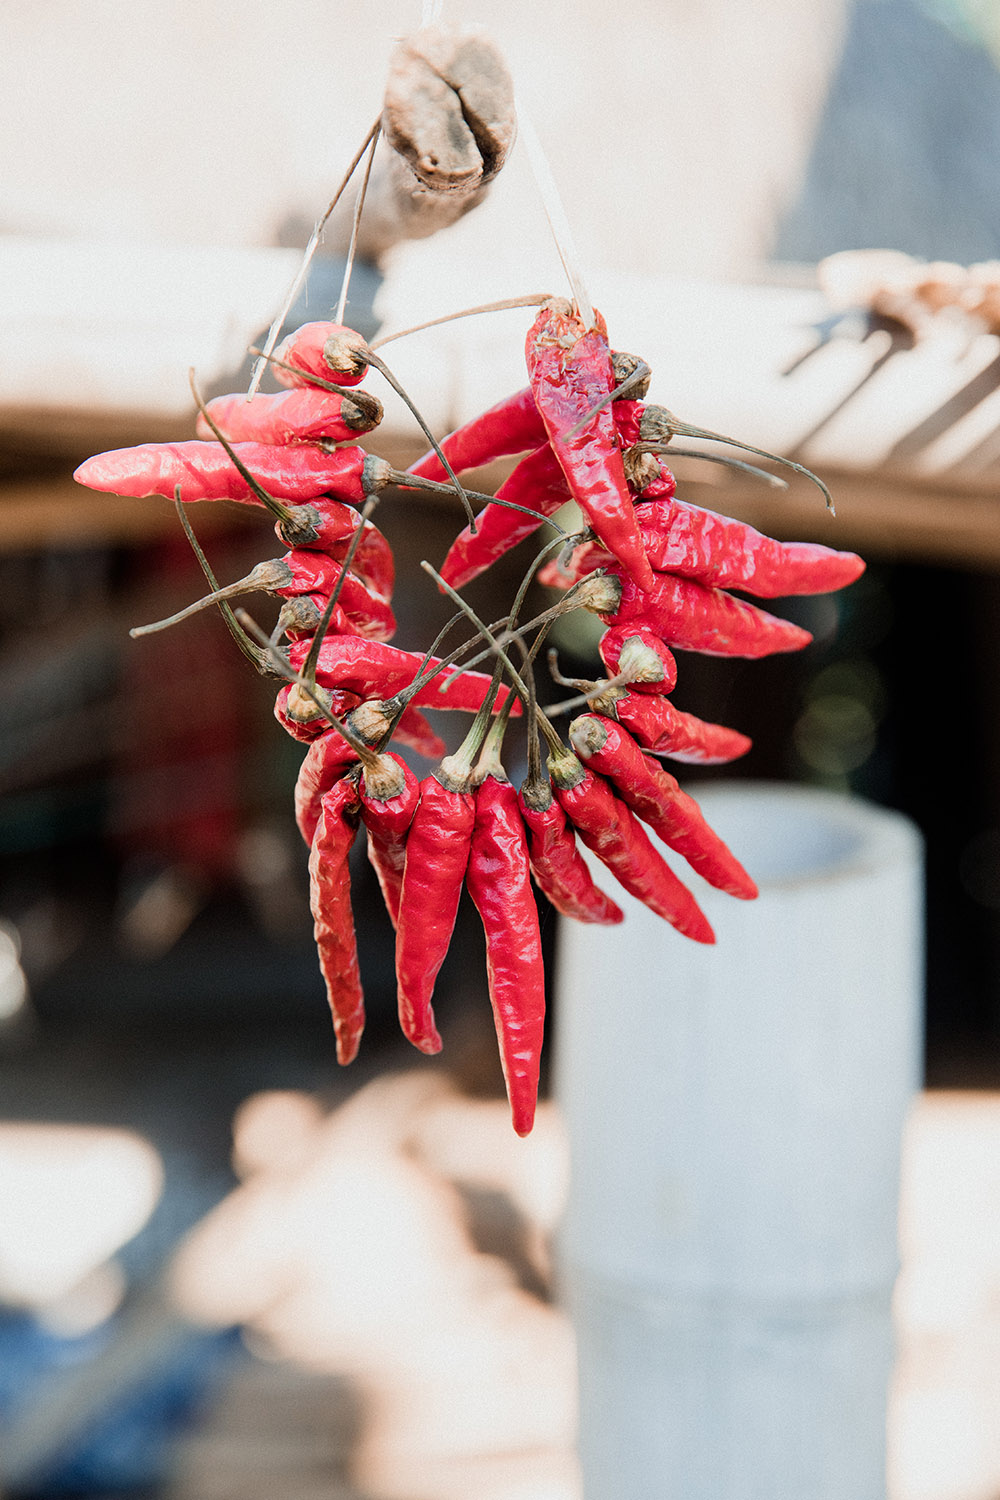 bunch of red chillies drying in the sun